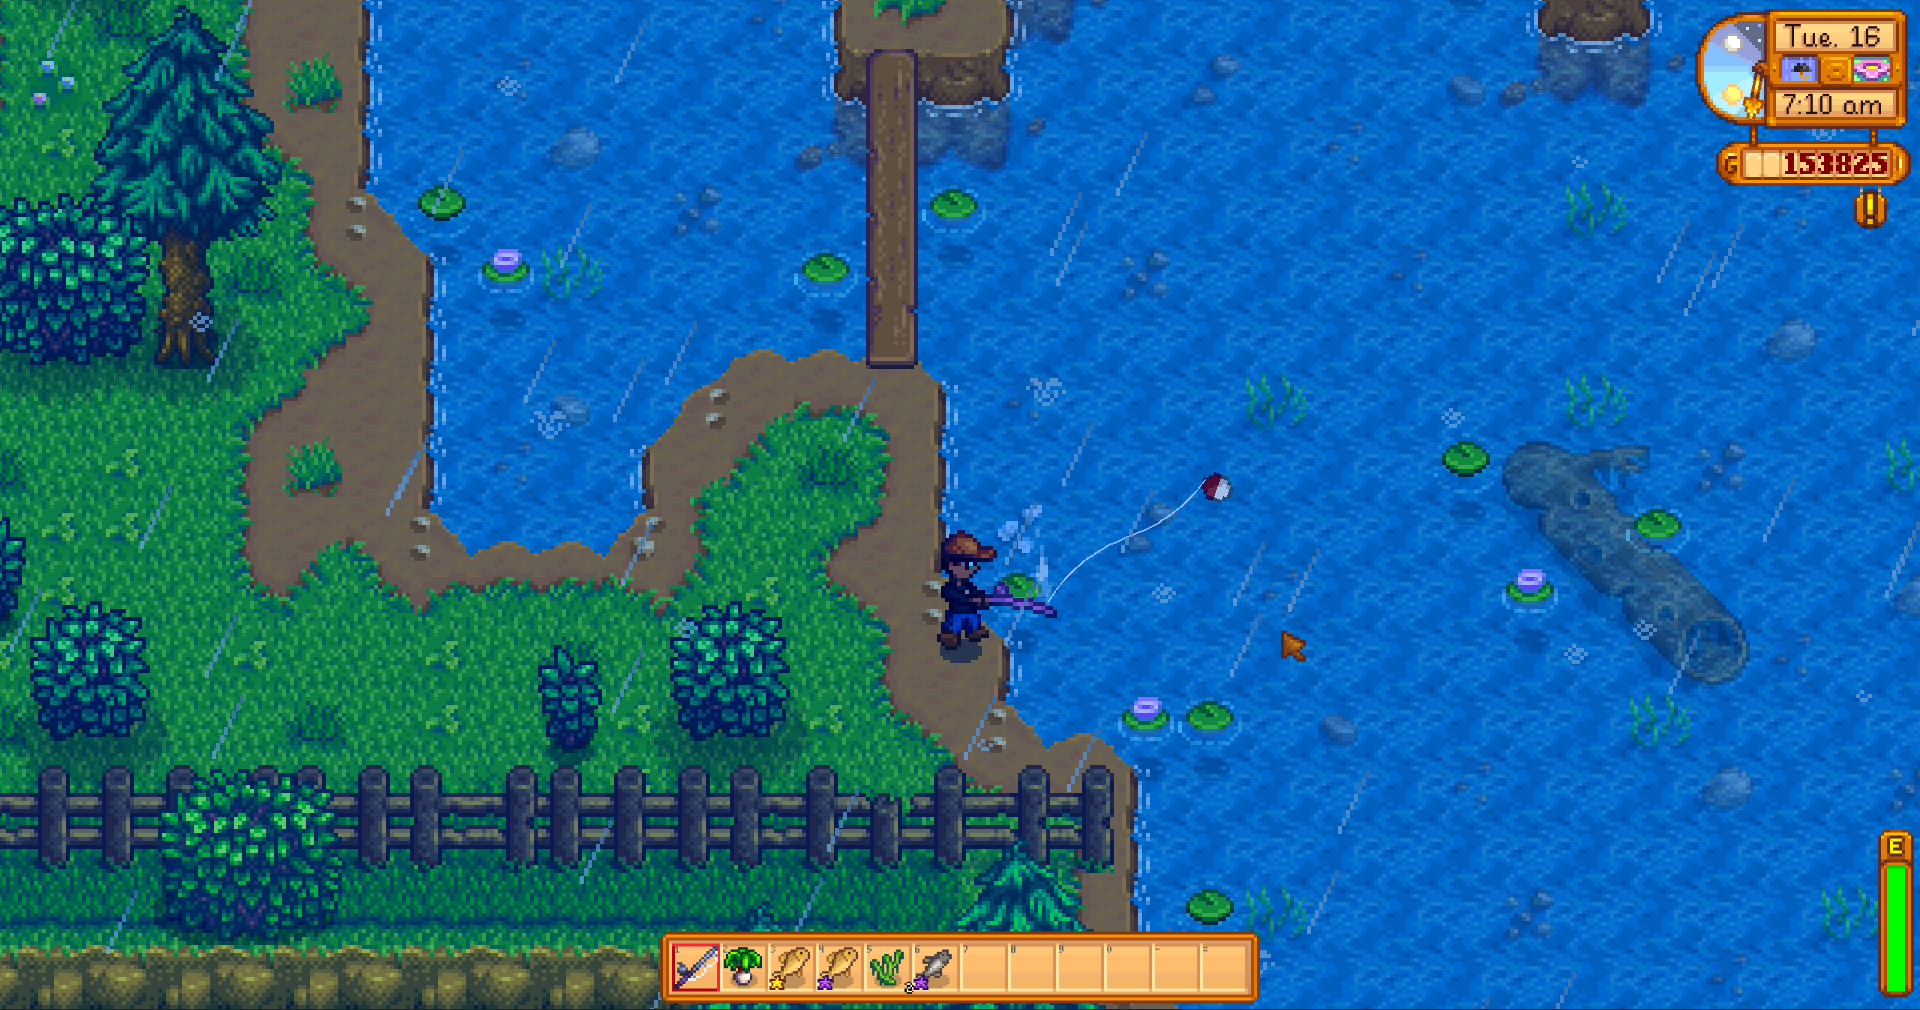 Stardew Valley Fishing Guide: How to Catch Every Fish, Catchable